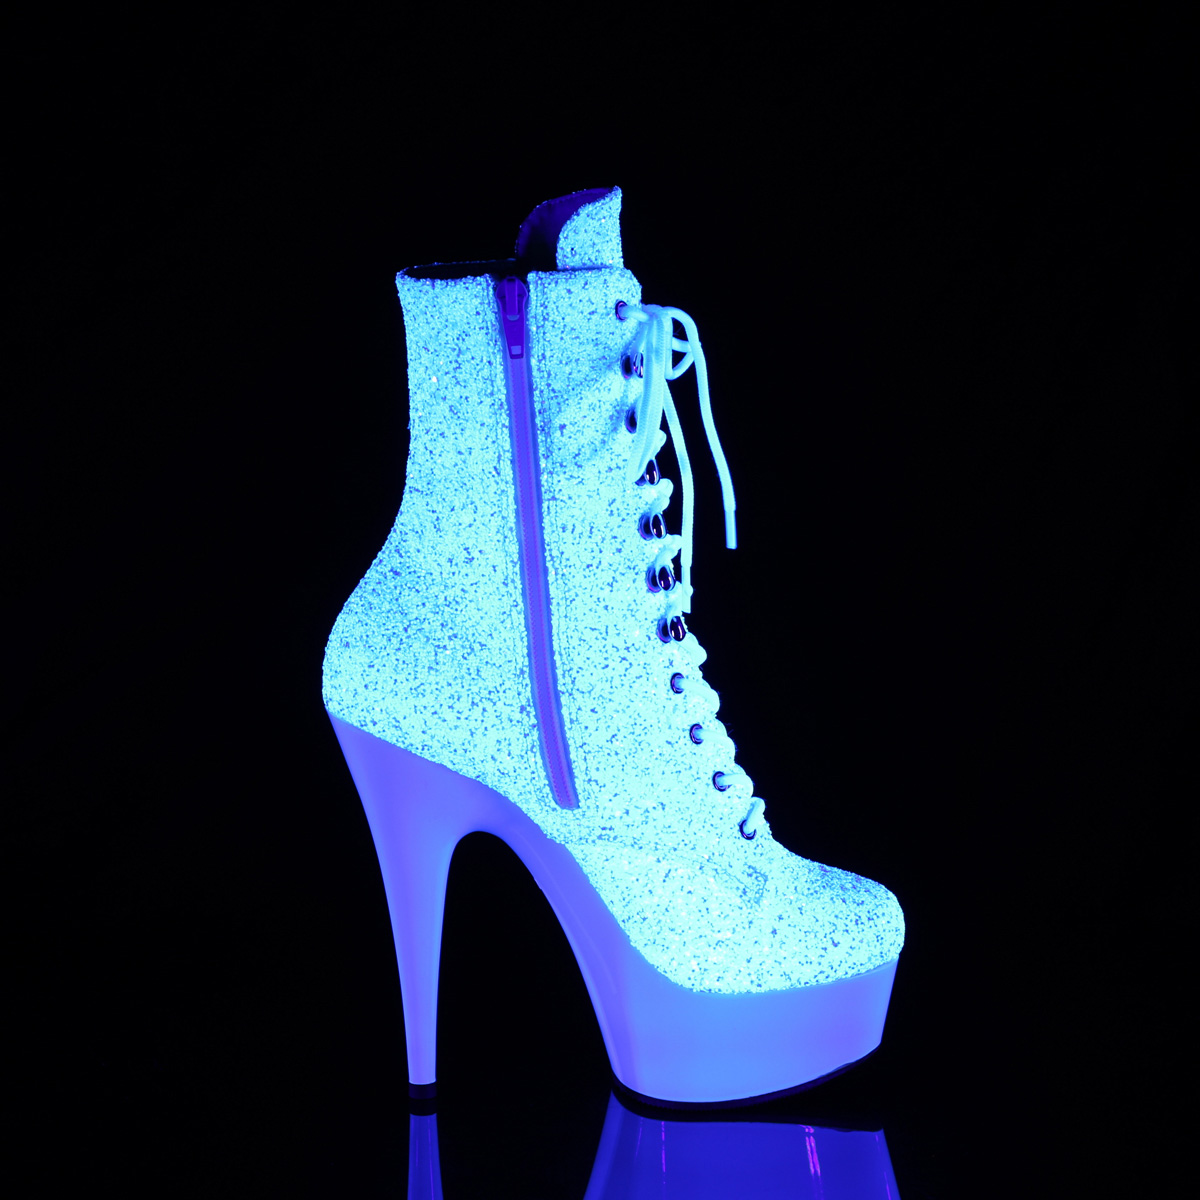 Womens LED Light Up Platform Sandals Clear Transparent High Heel Stripper  Shoes From Nickyoung07, $23.89 | DHgate.Com